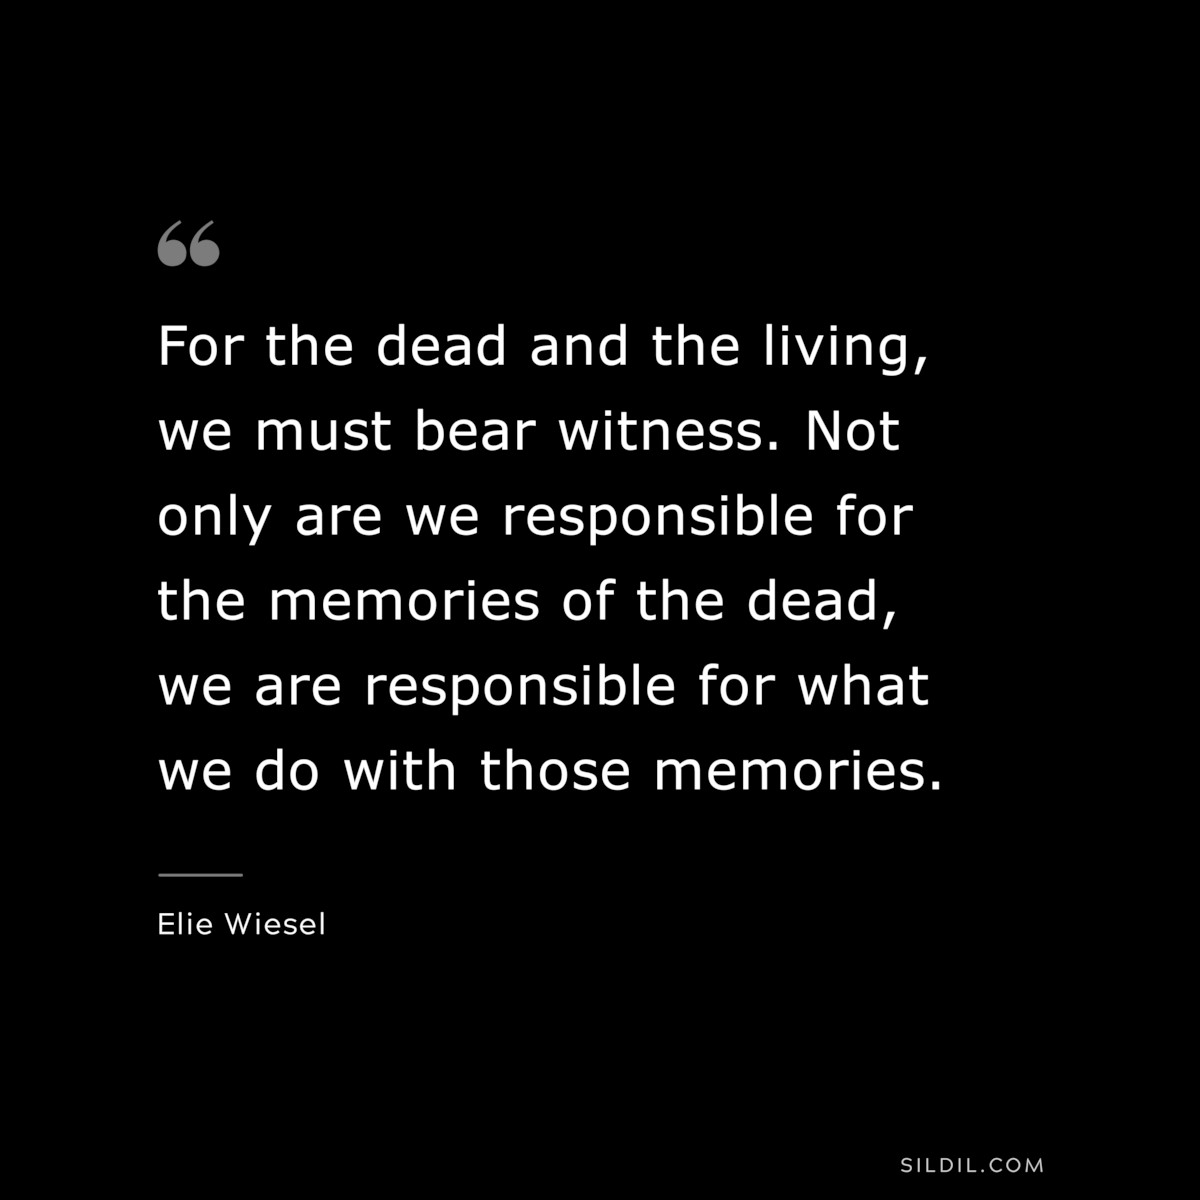 For the dead and the living, we must bear witness. Not only are we responsible for the memories of the dead, we are responsible for what we do with those memories. ― Elie Wiesel